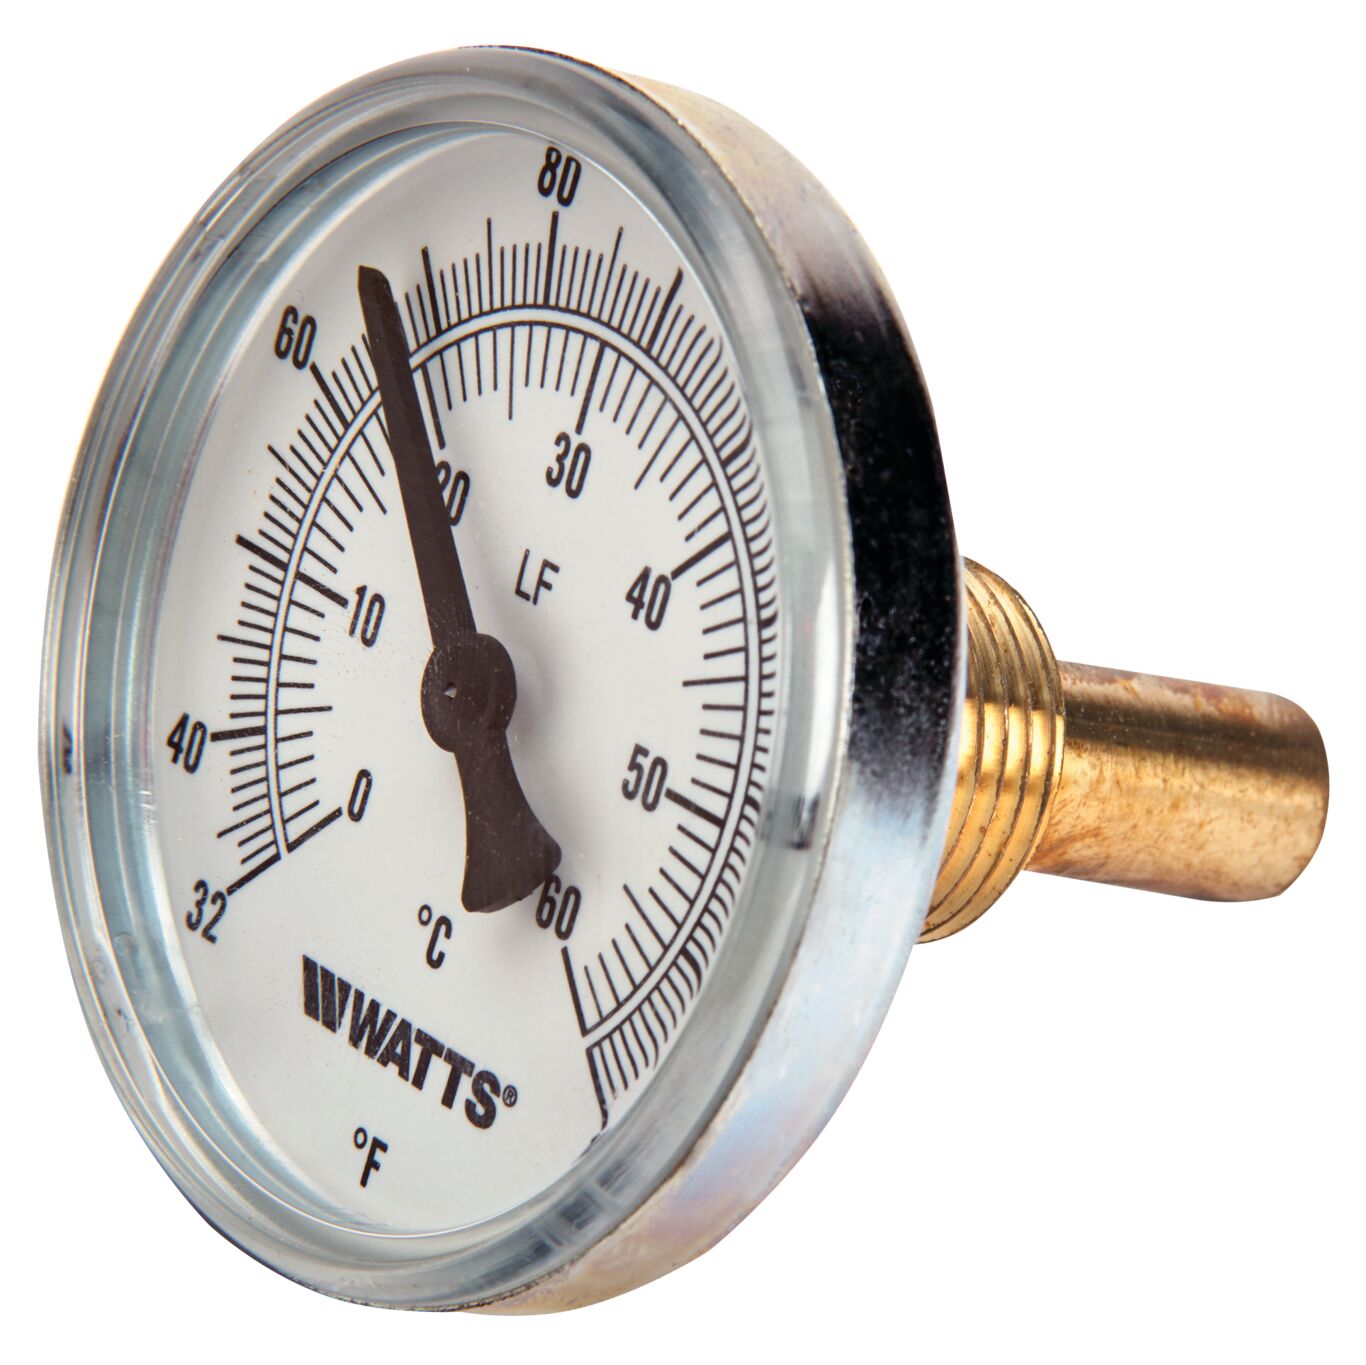 Product Image Lead Free Bimetal Thermometer Center Back Entry 2 1/2 In Dial, 32 To 140 degree F, 2 In Probe